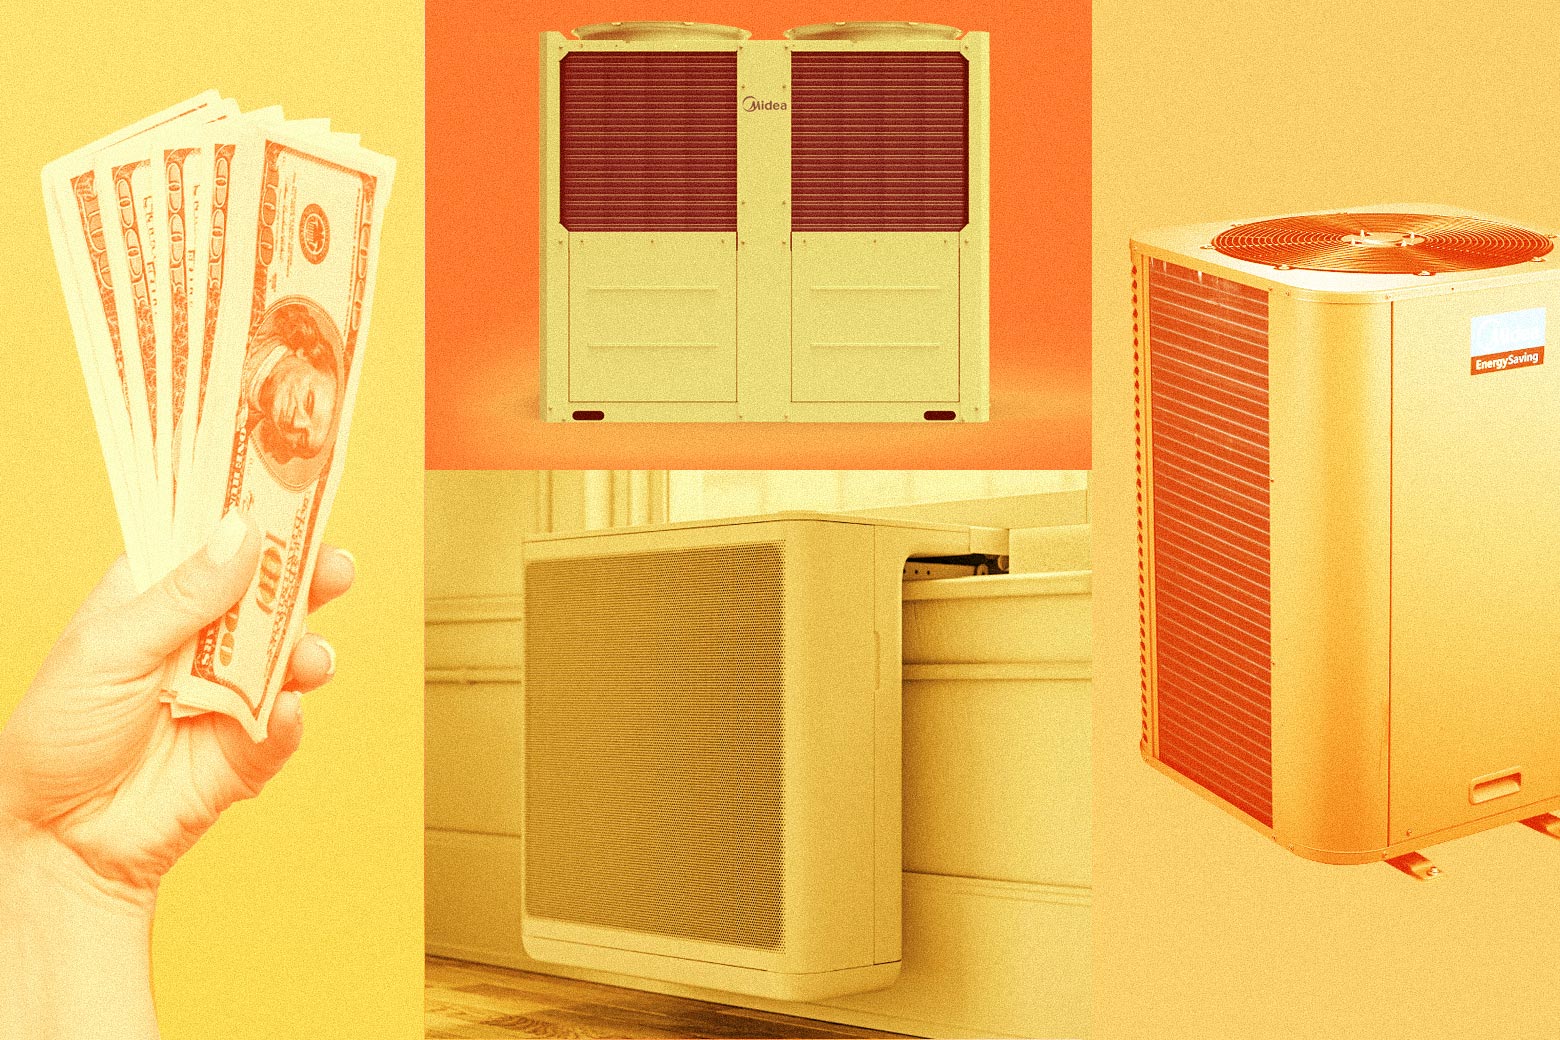 Finding the Right Air Conditioner Is an Impossible Game. What If We Changed the Rules? Meg Duff